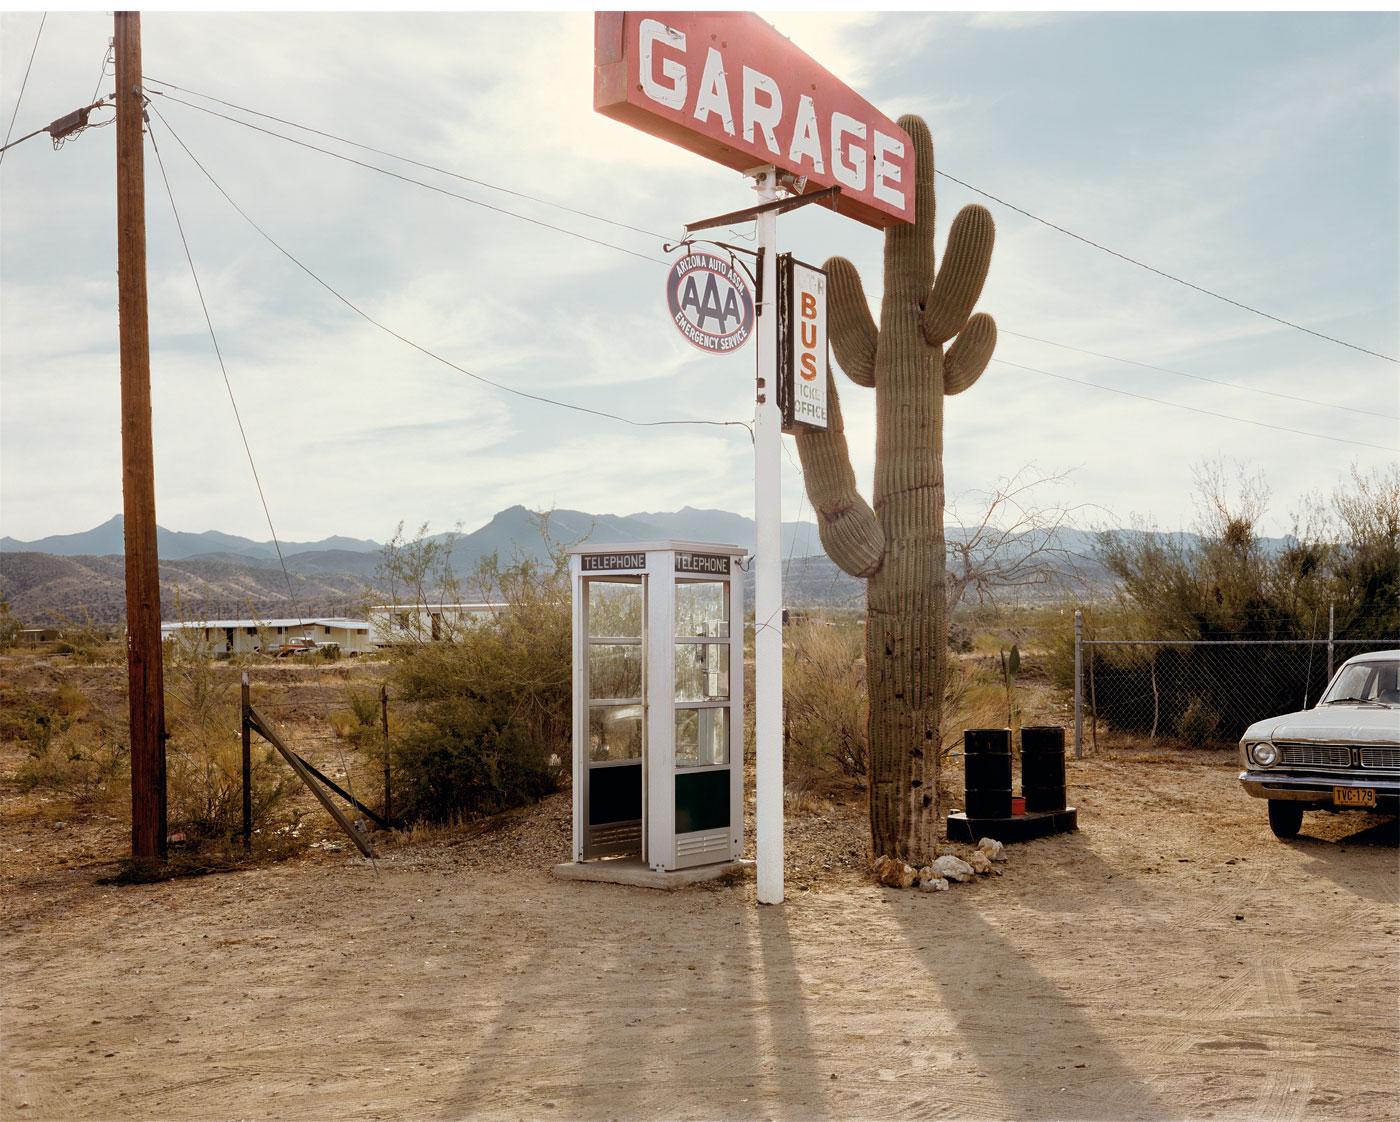 On the Road with Stephen Shore | Art & Object